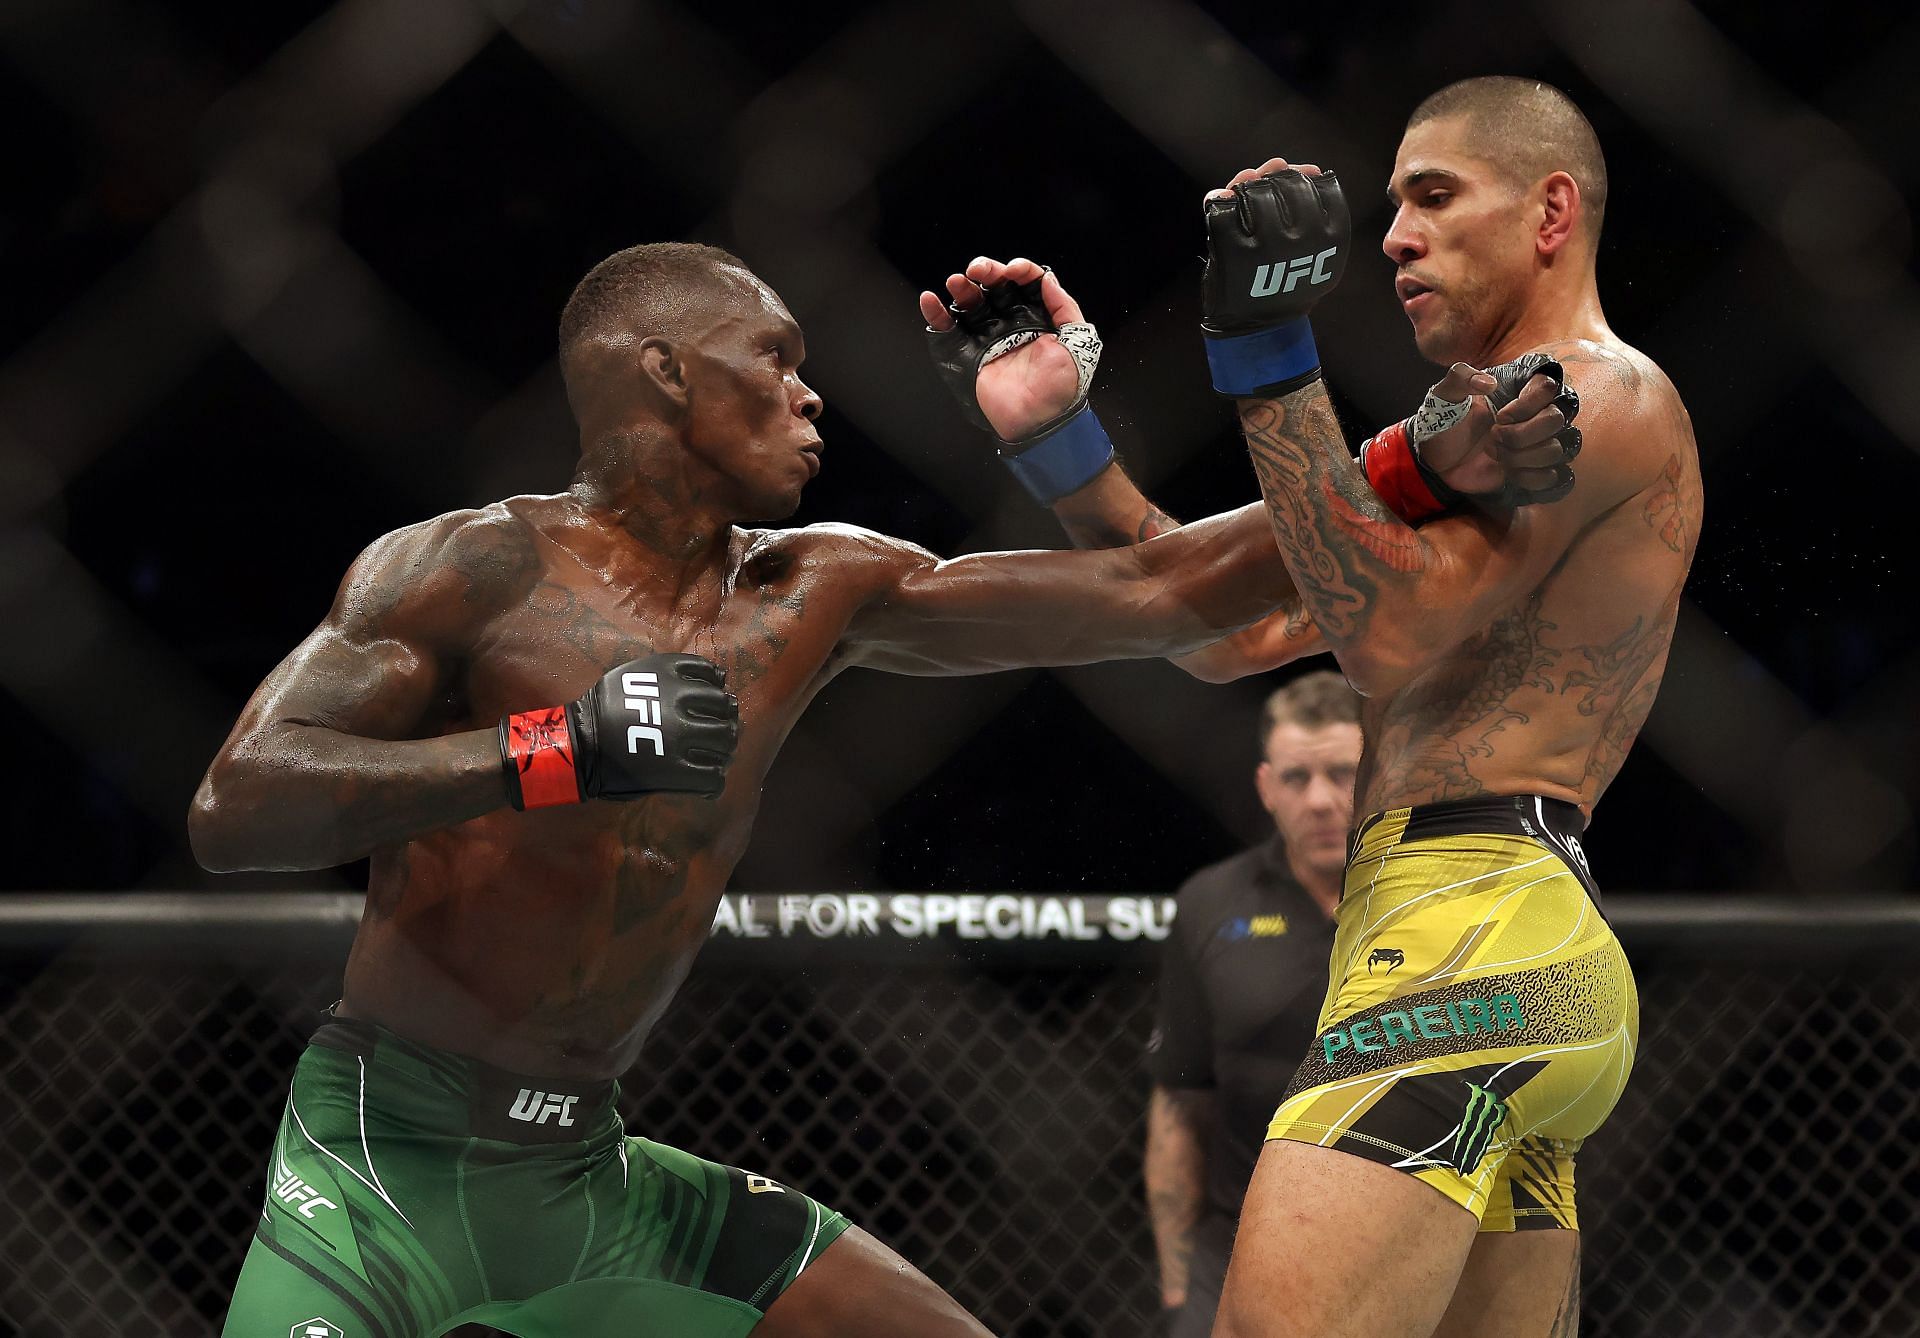 Could Israel Adesanya&#039;s pace make Alex Pereira wilt in a rematch?